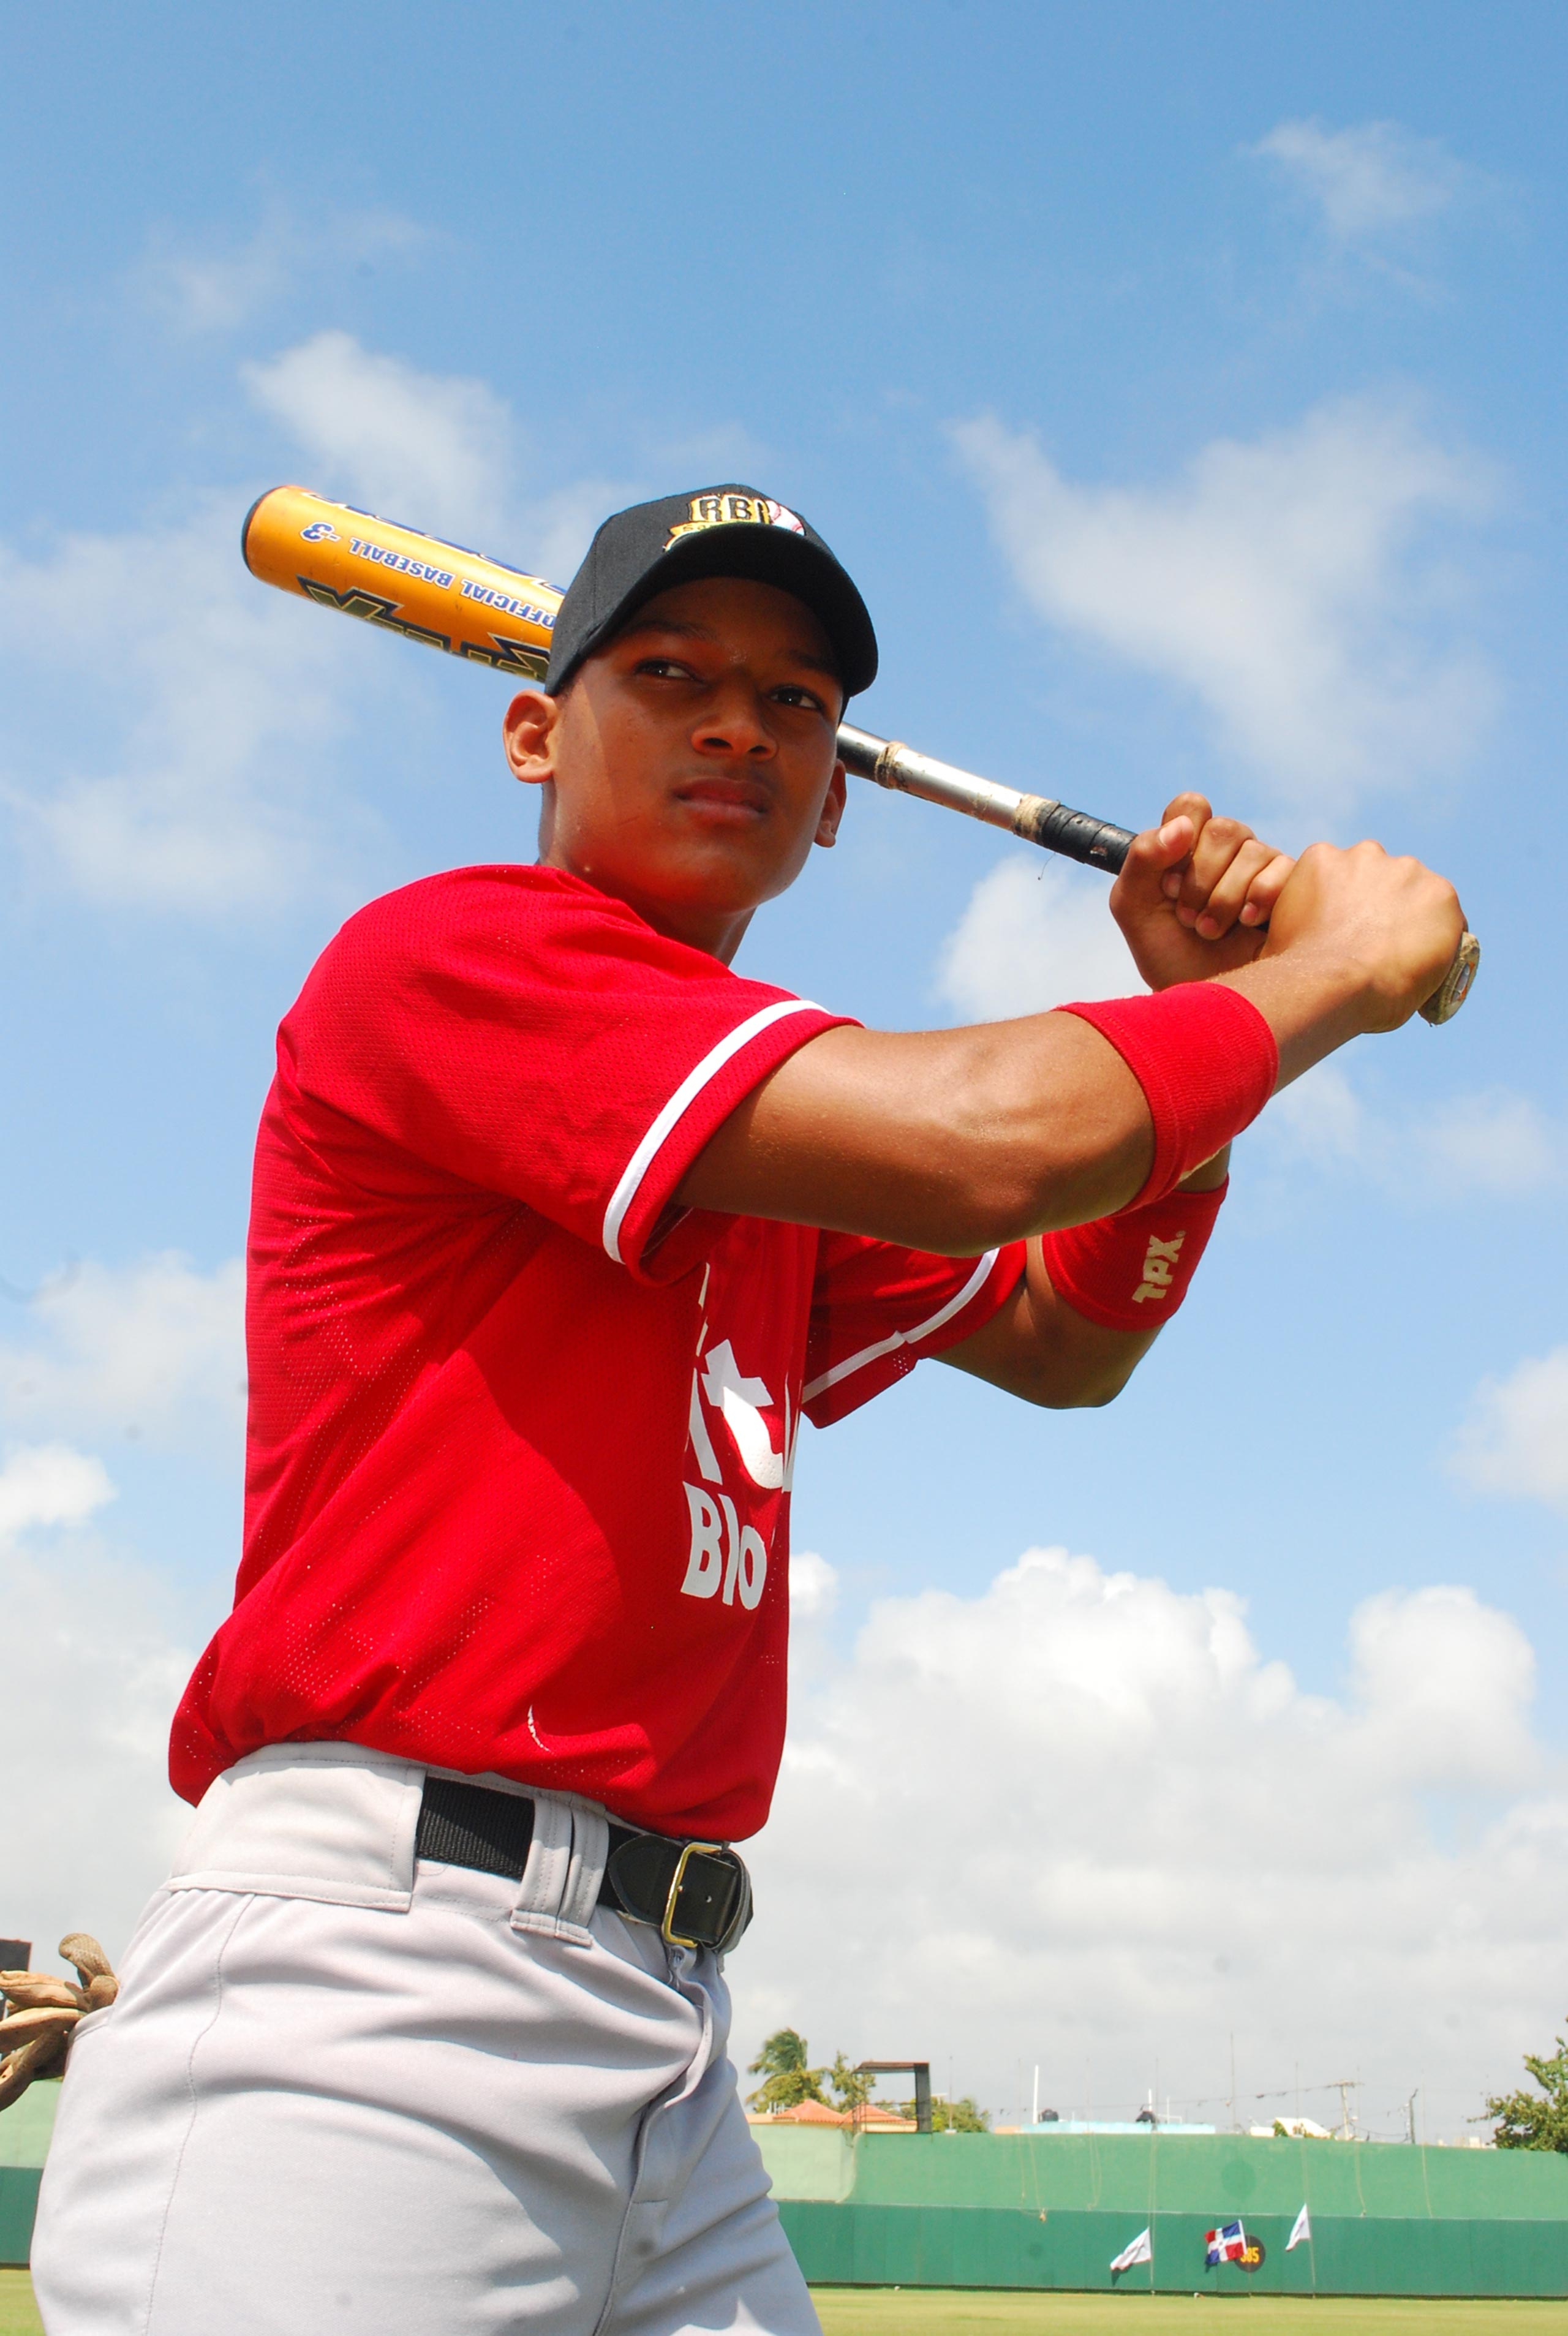 The Dominican Republic is considered a hotbed of talent, and CEMEX’s program has helped put baseball within the reach of thousands of young athletes